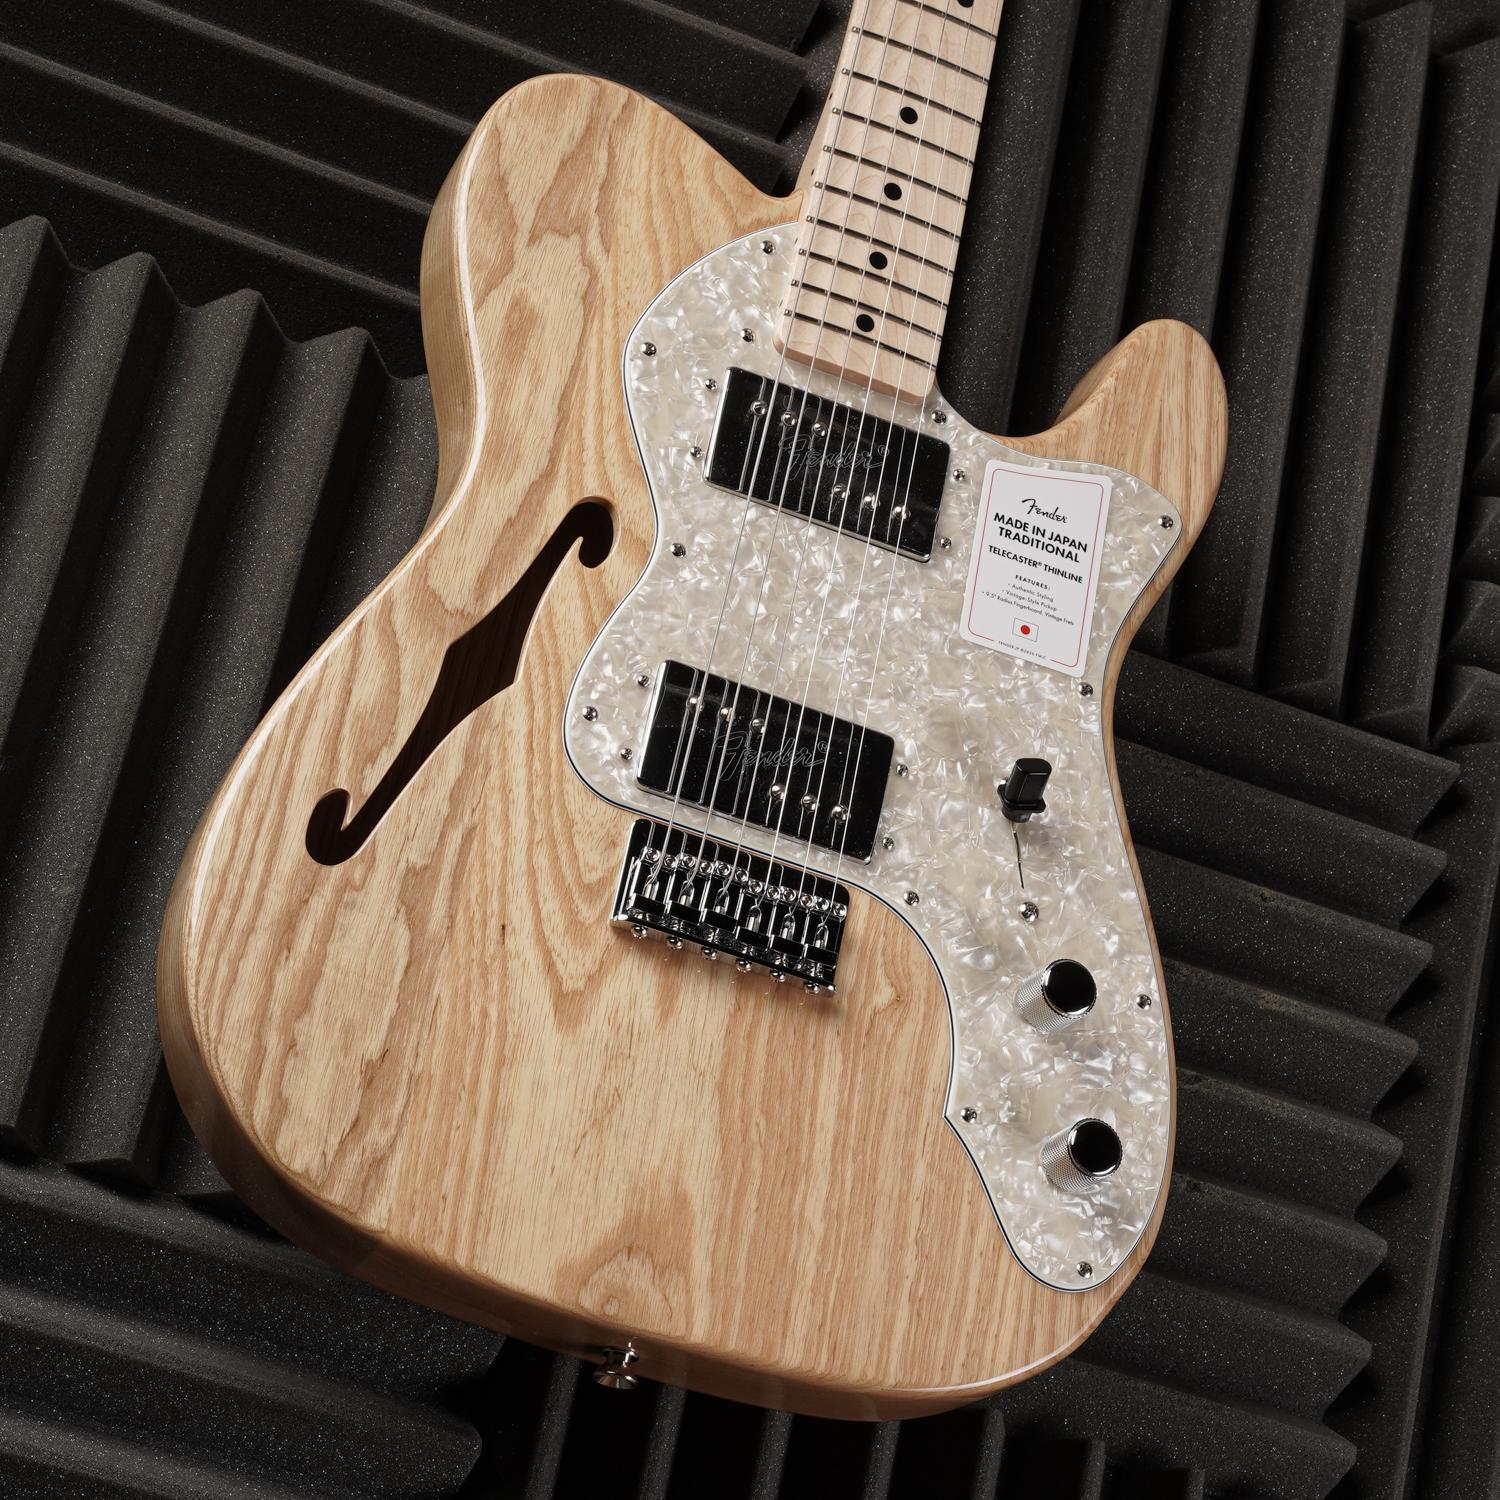 MIJ Traditional '70s Telecaster Thinline with Maple Fretboard